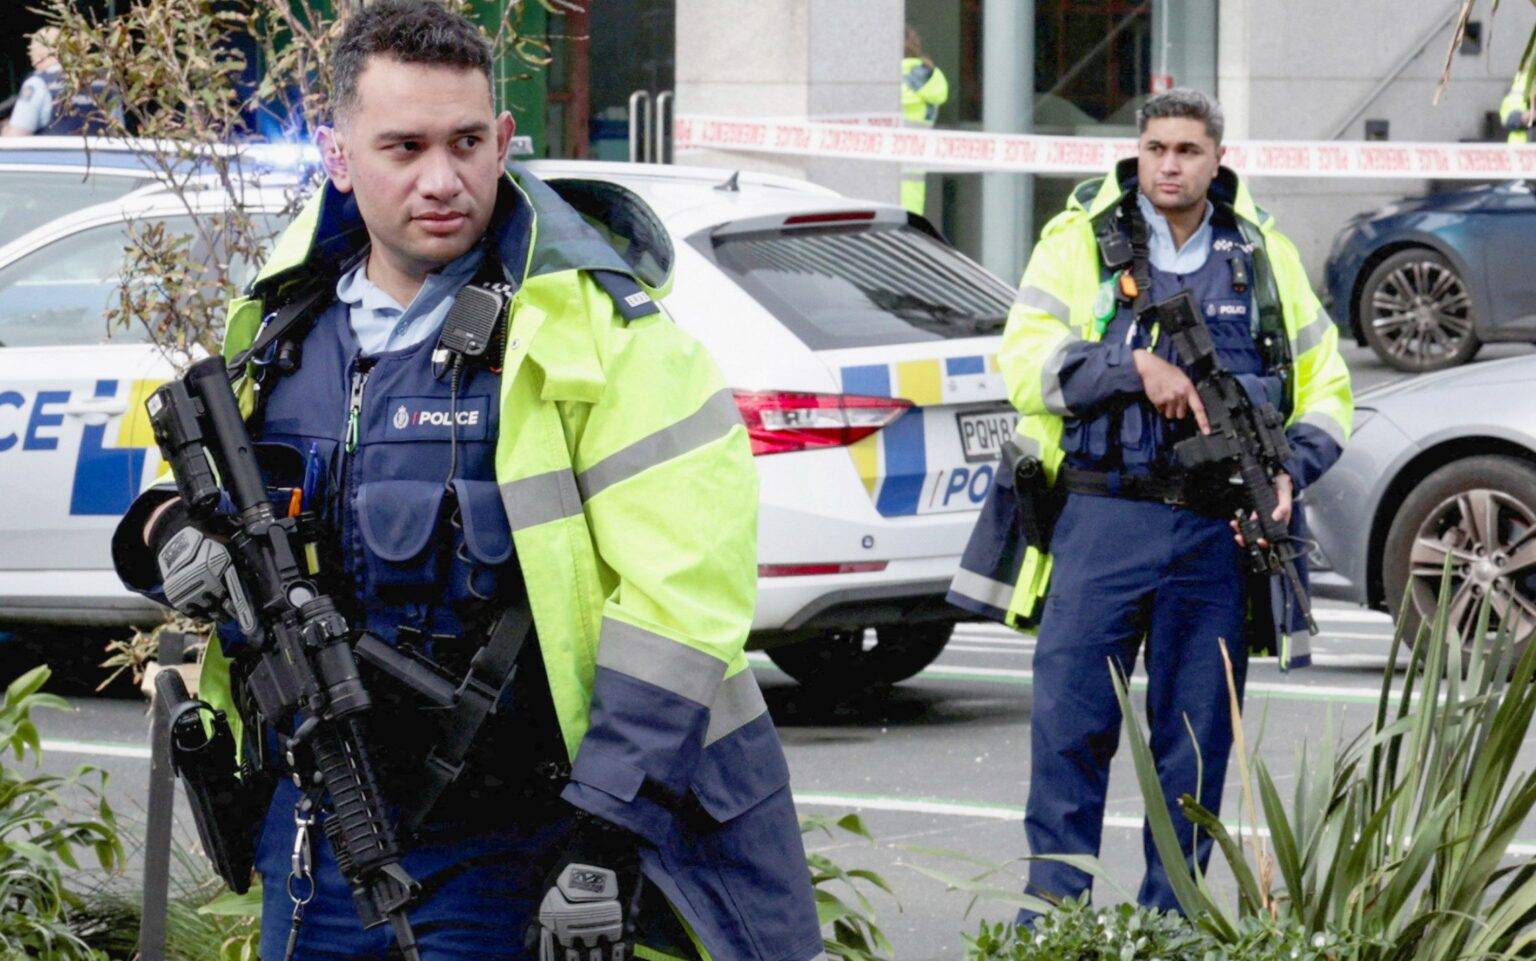 Auckland shooting: Two dead in New Zealand shooting just hours before World Cup 